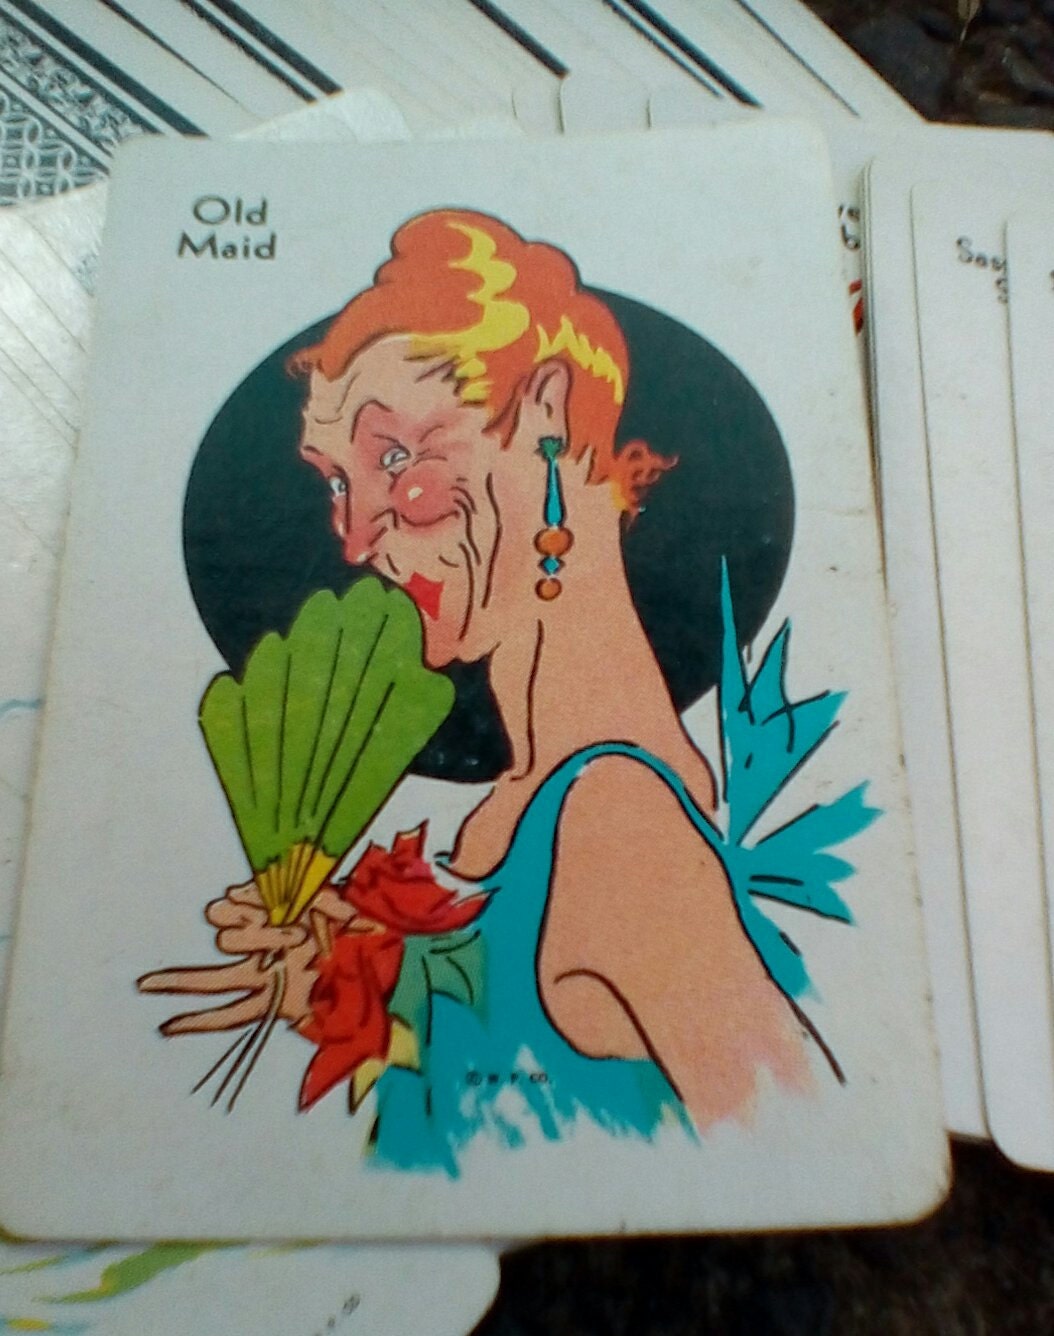 buy old maid card deck